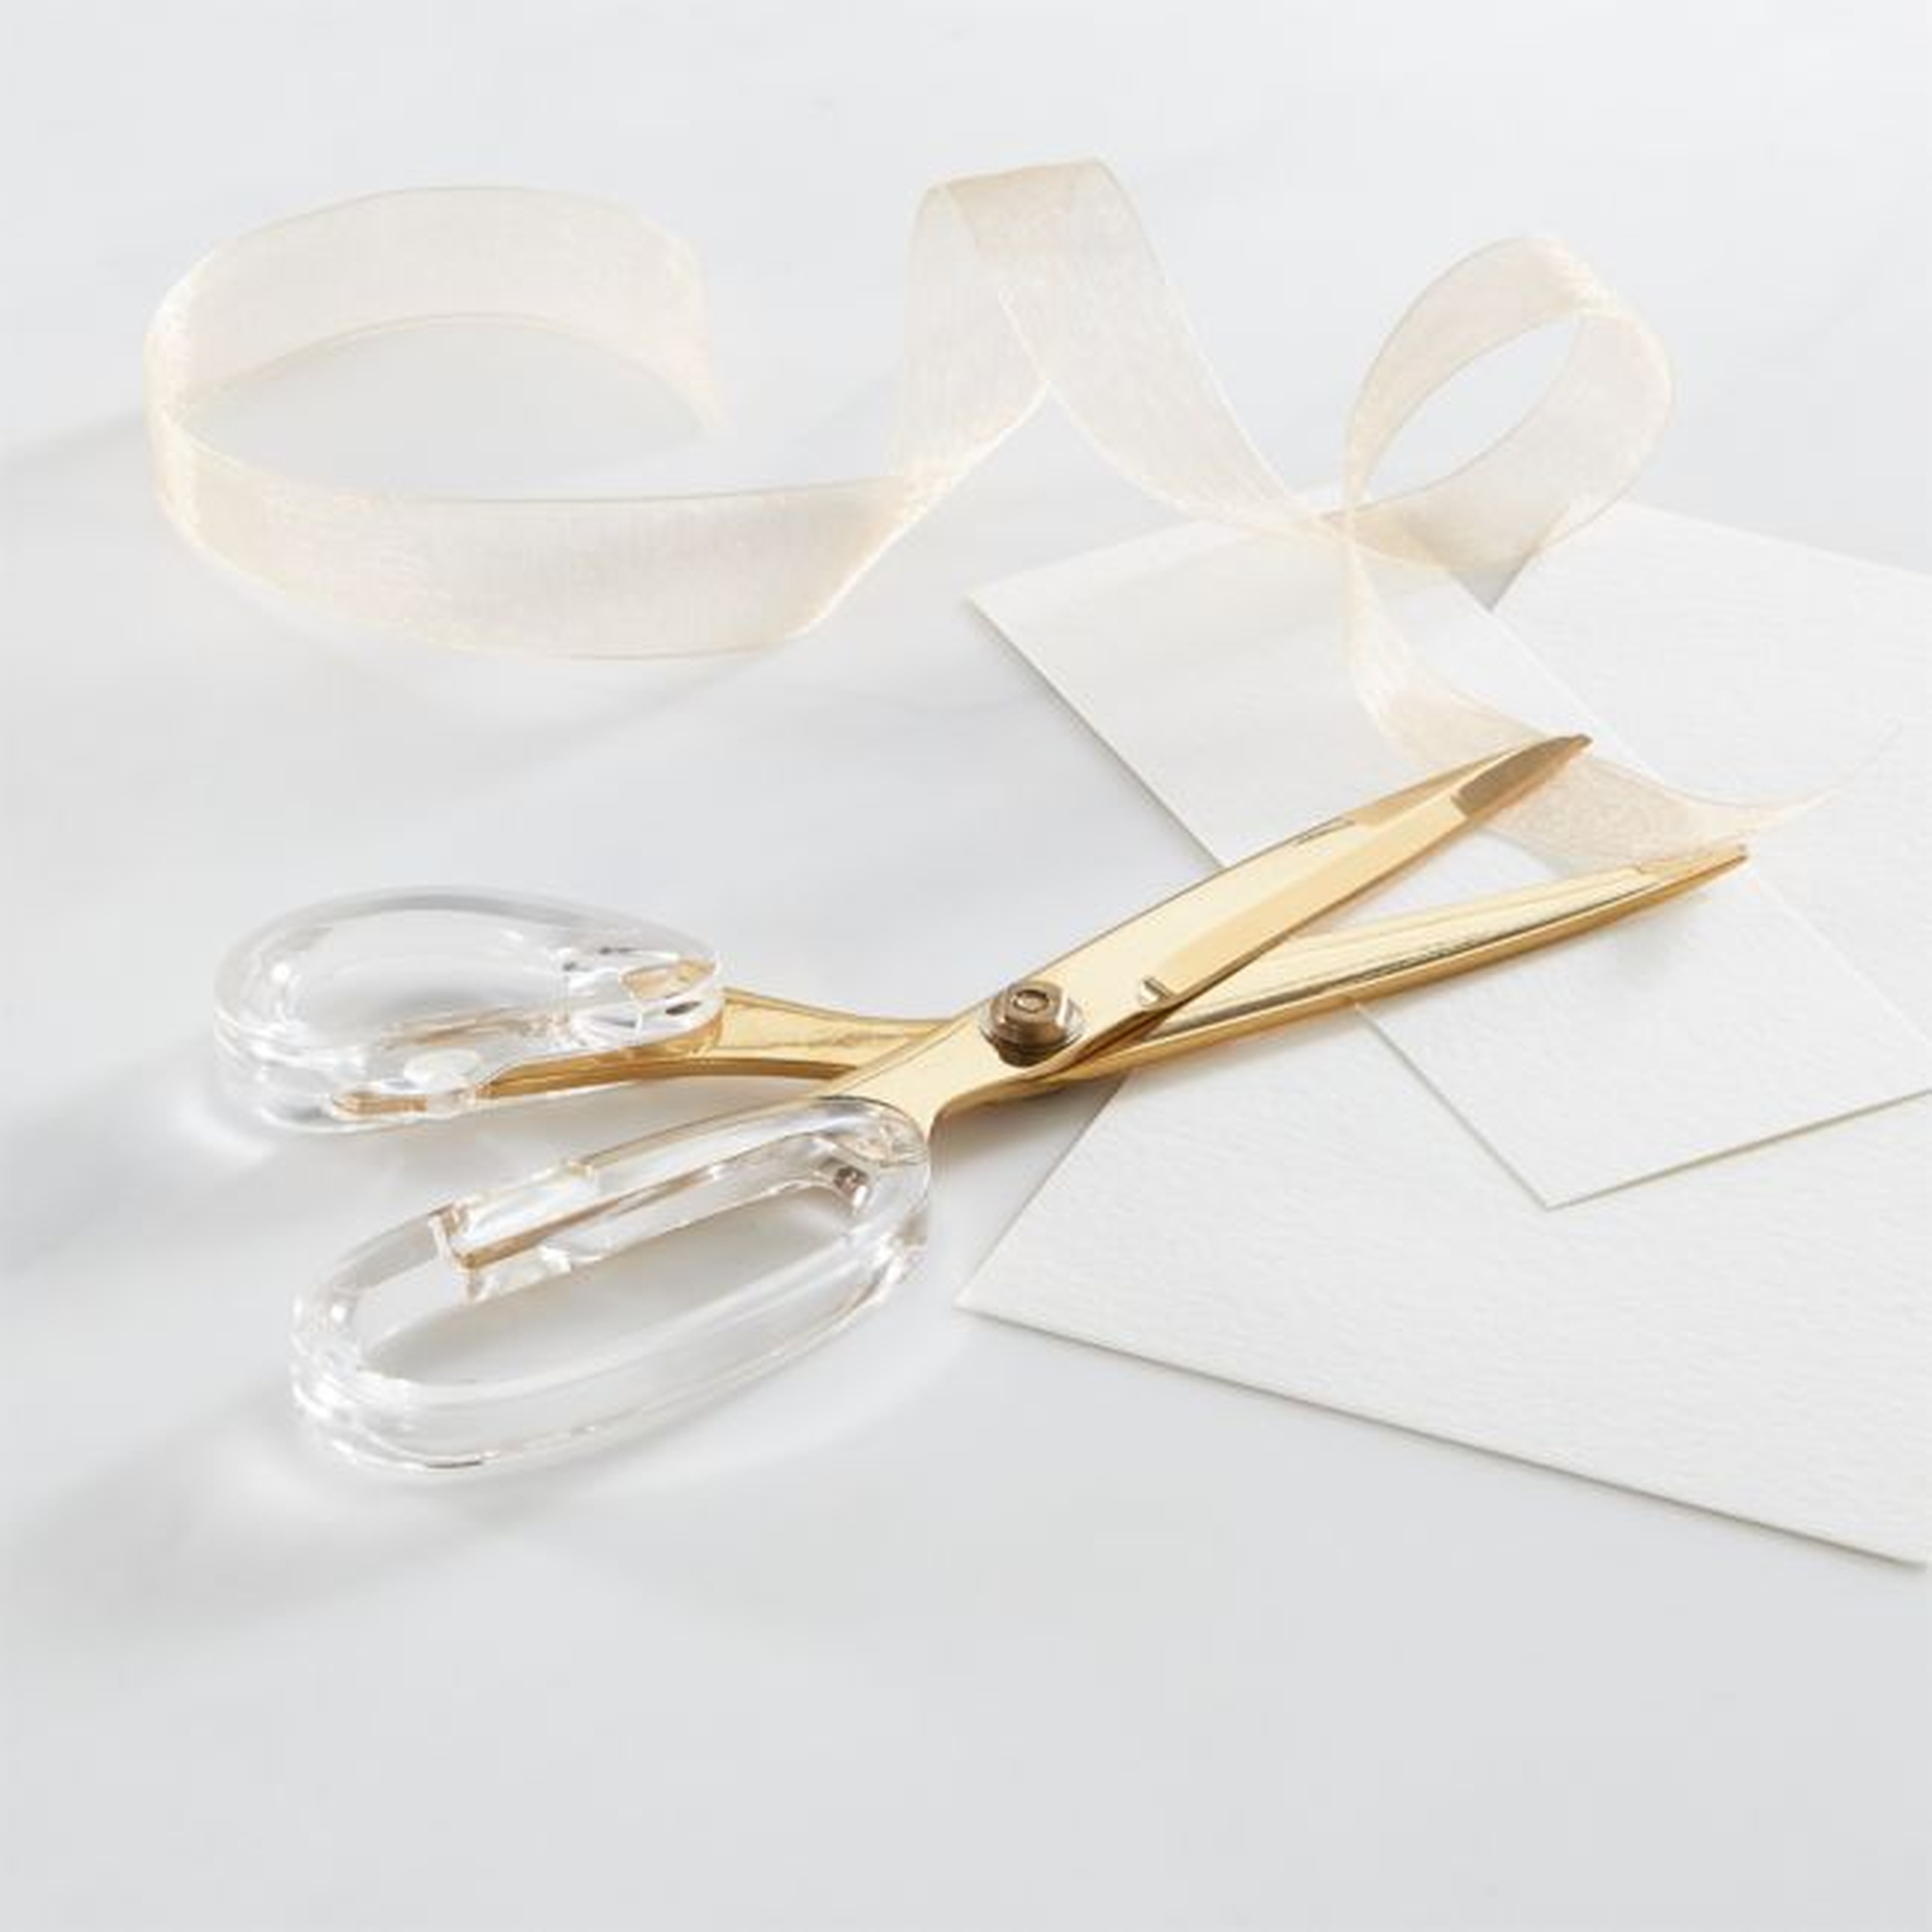 Russell + Hazel Gold and Acrylic Scissors - Crate and Barrel